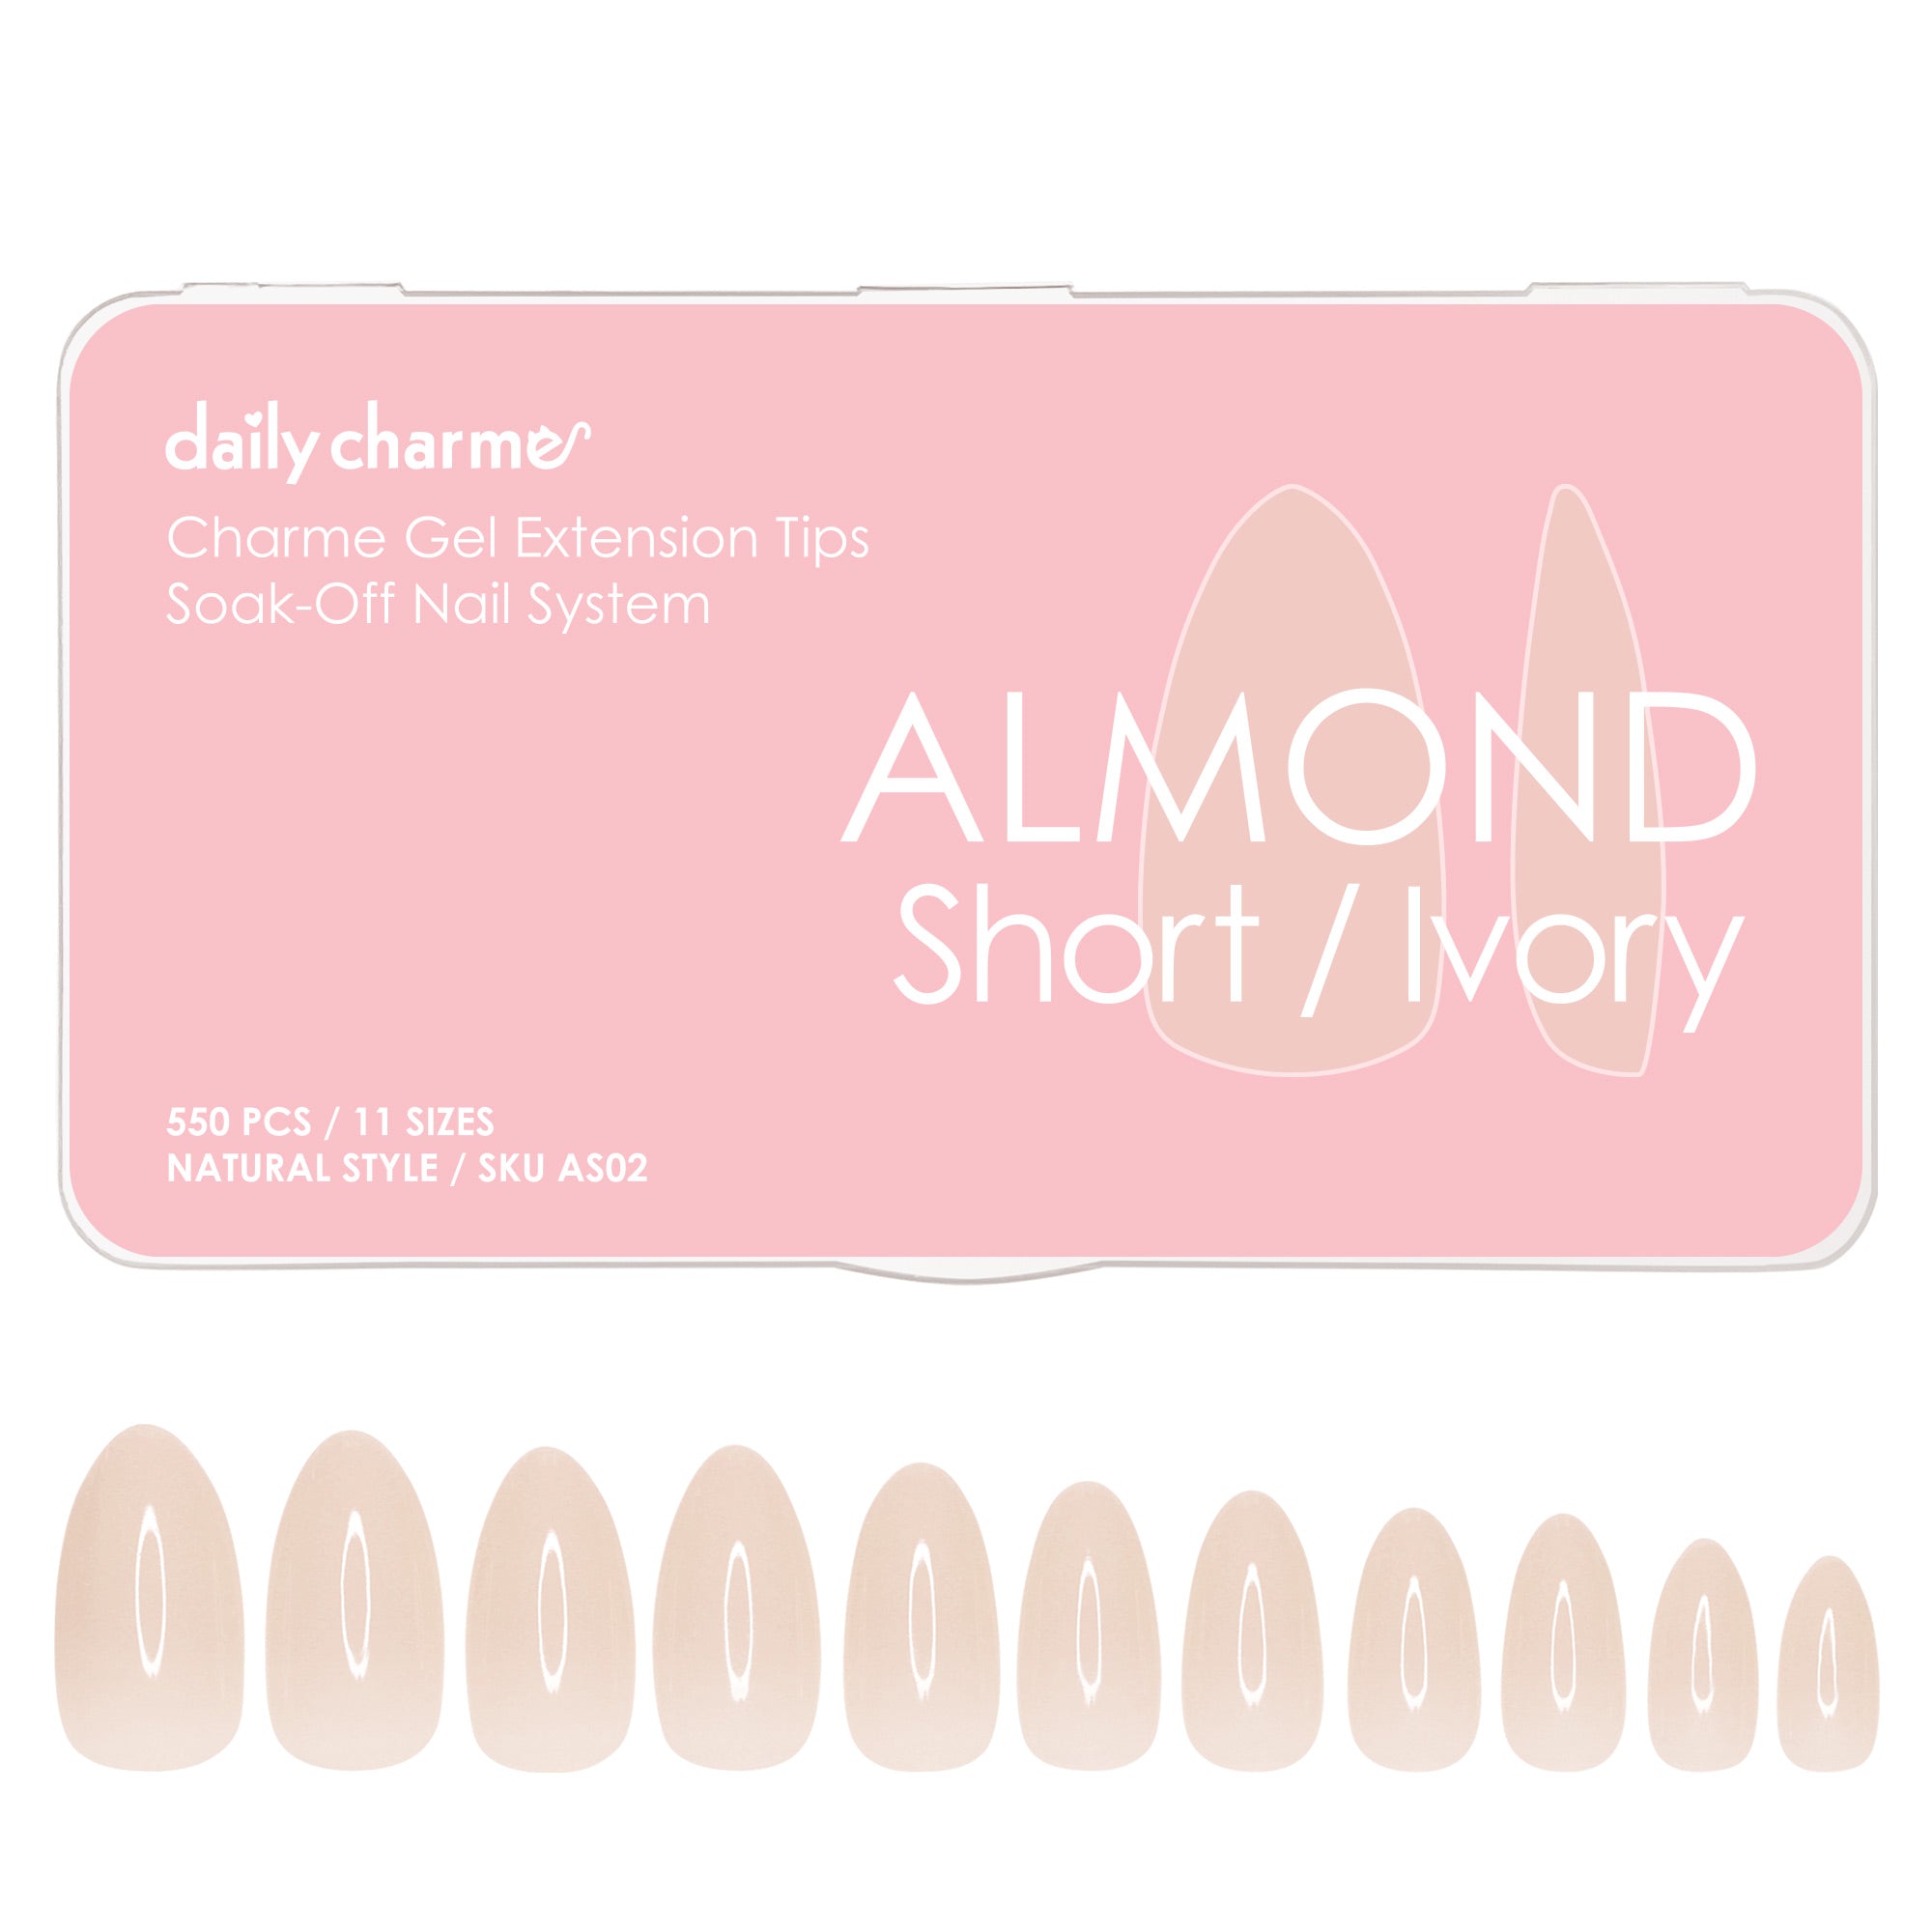 Charme Gel Extension Tips / Almond / Short / Ivory